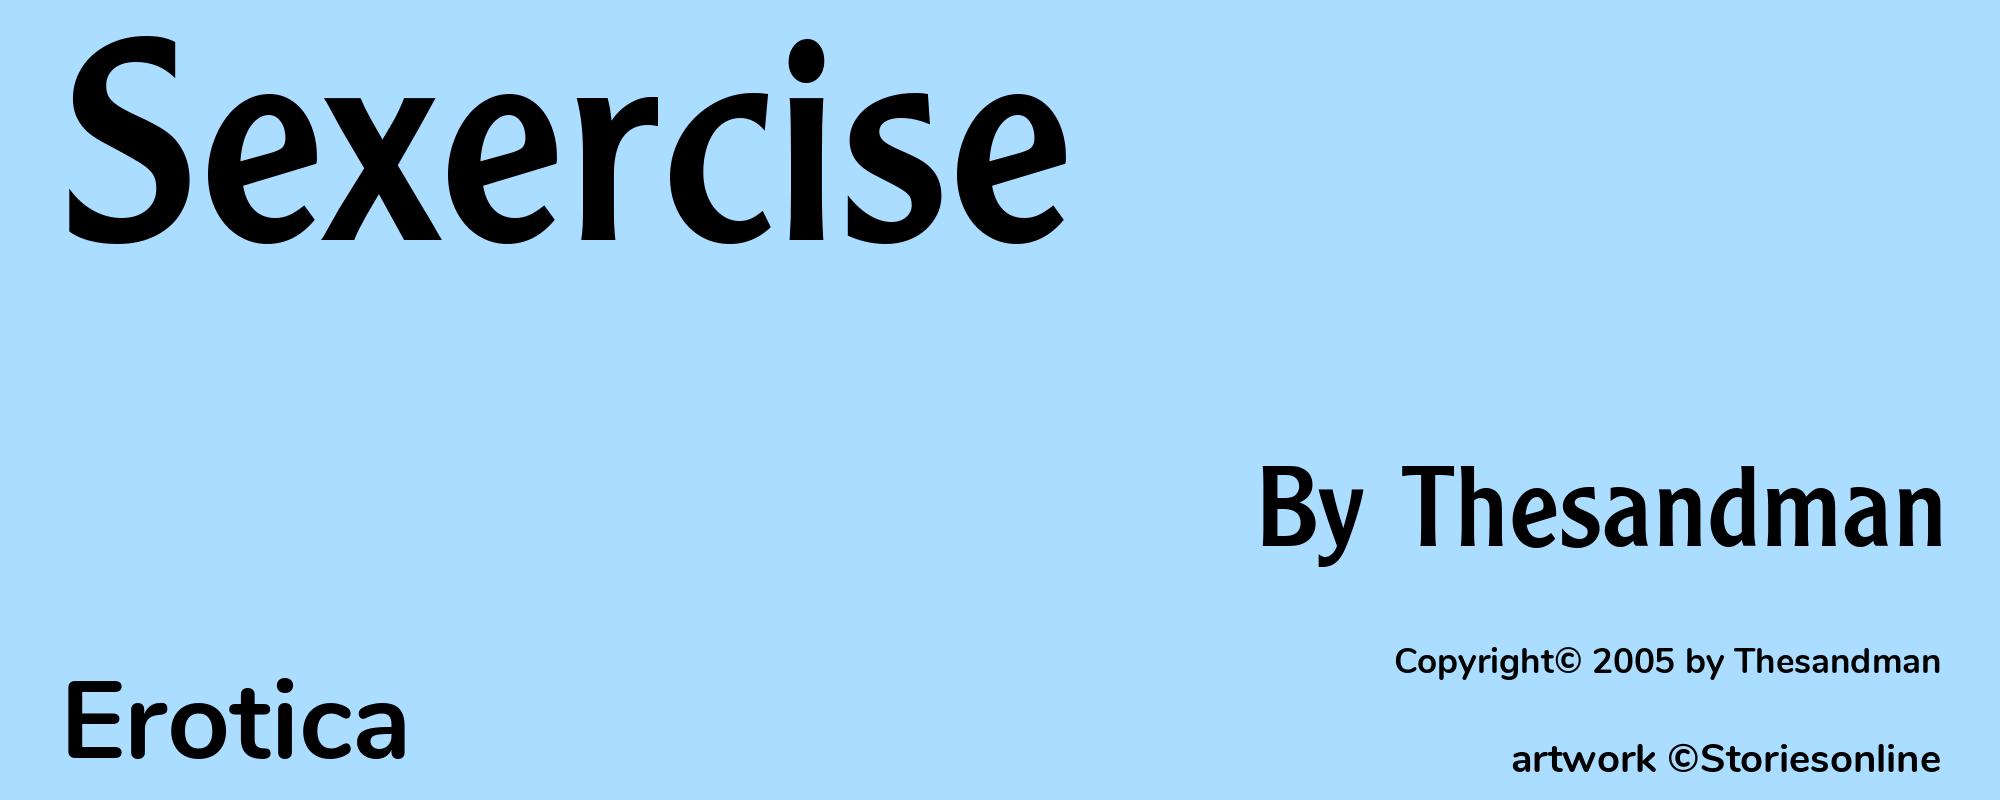 Sexercise - Cover